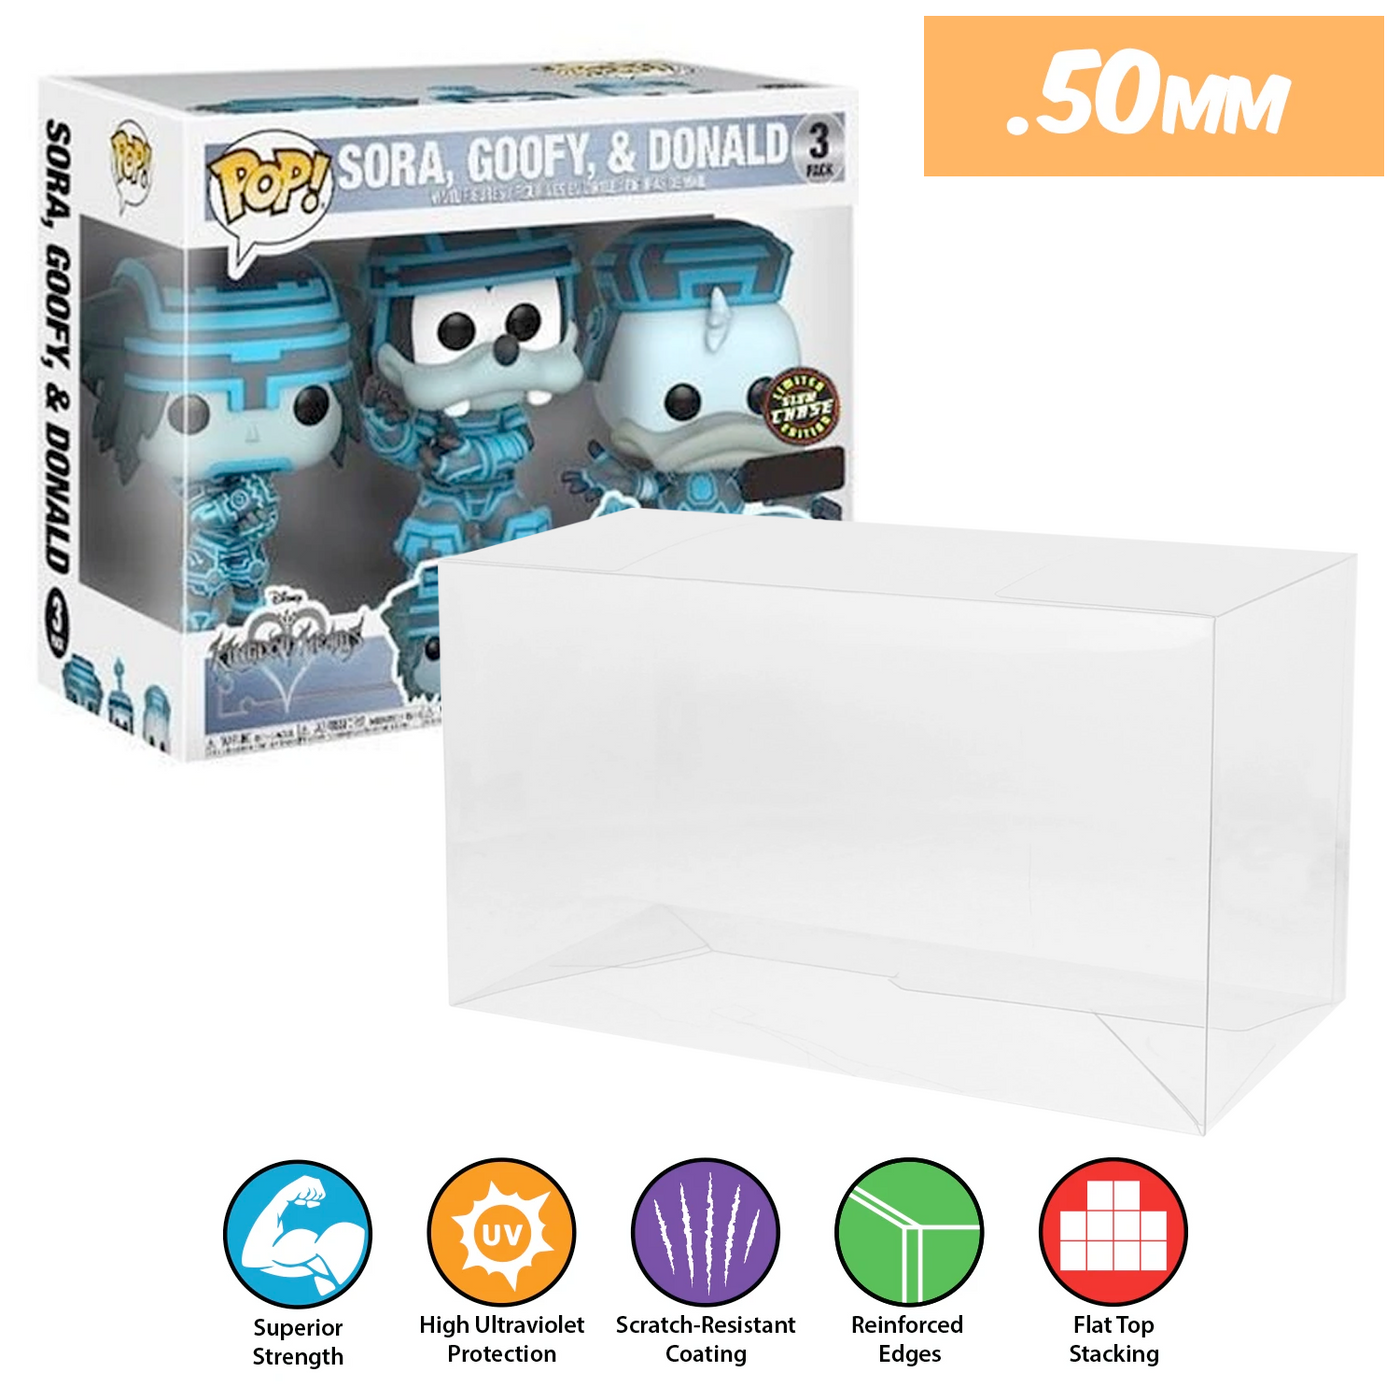 sora goofy donald chase tron 3 pack best funko pop protectors thick strong uv scratch flat top stack vinyl display geek plastic shield vaulted eco armor fits collect protect display case kollector protector